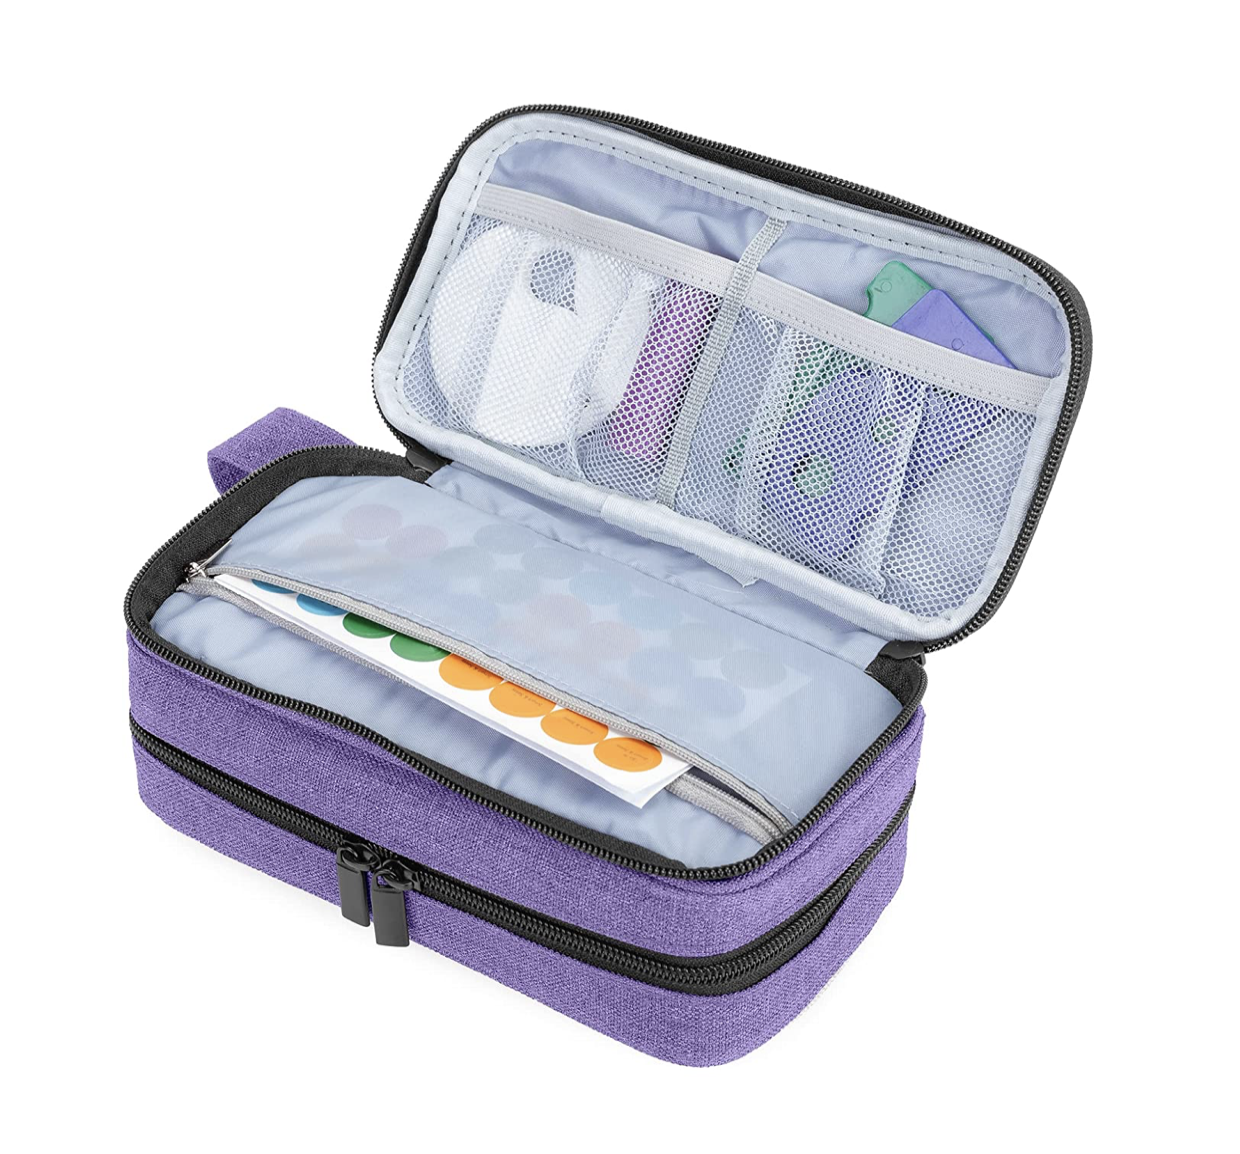 Essential Oil Carry Case (Holds 12 Bottles)